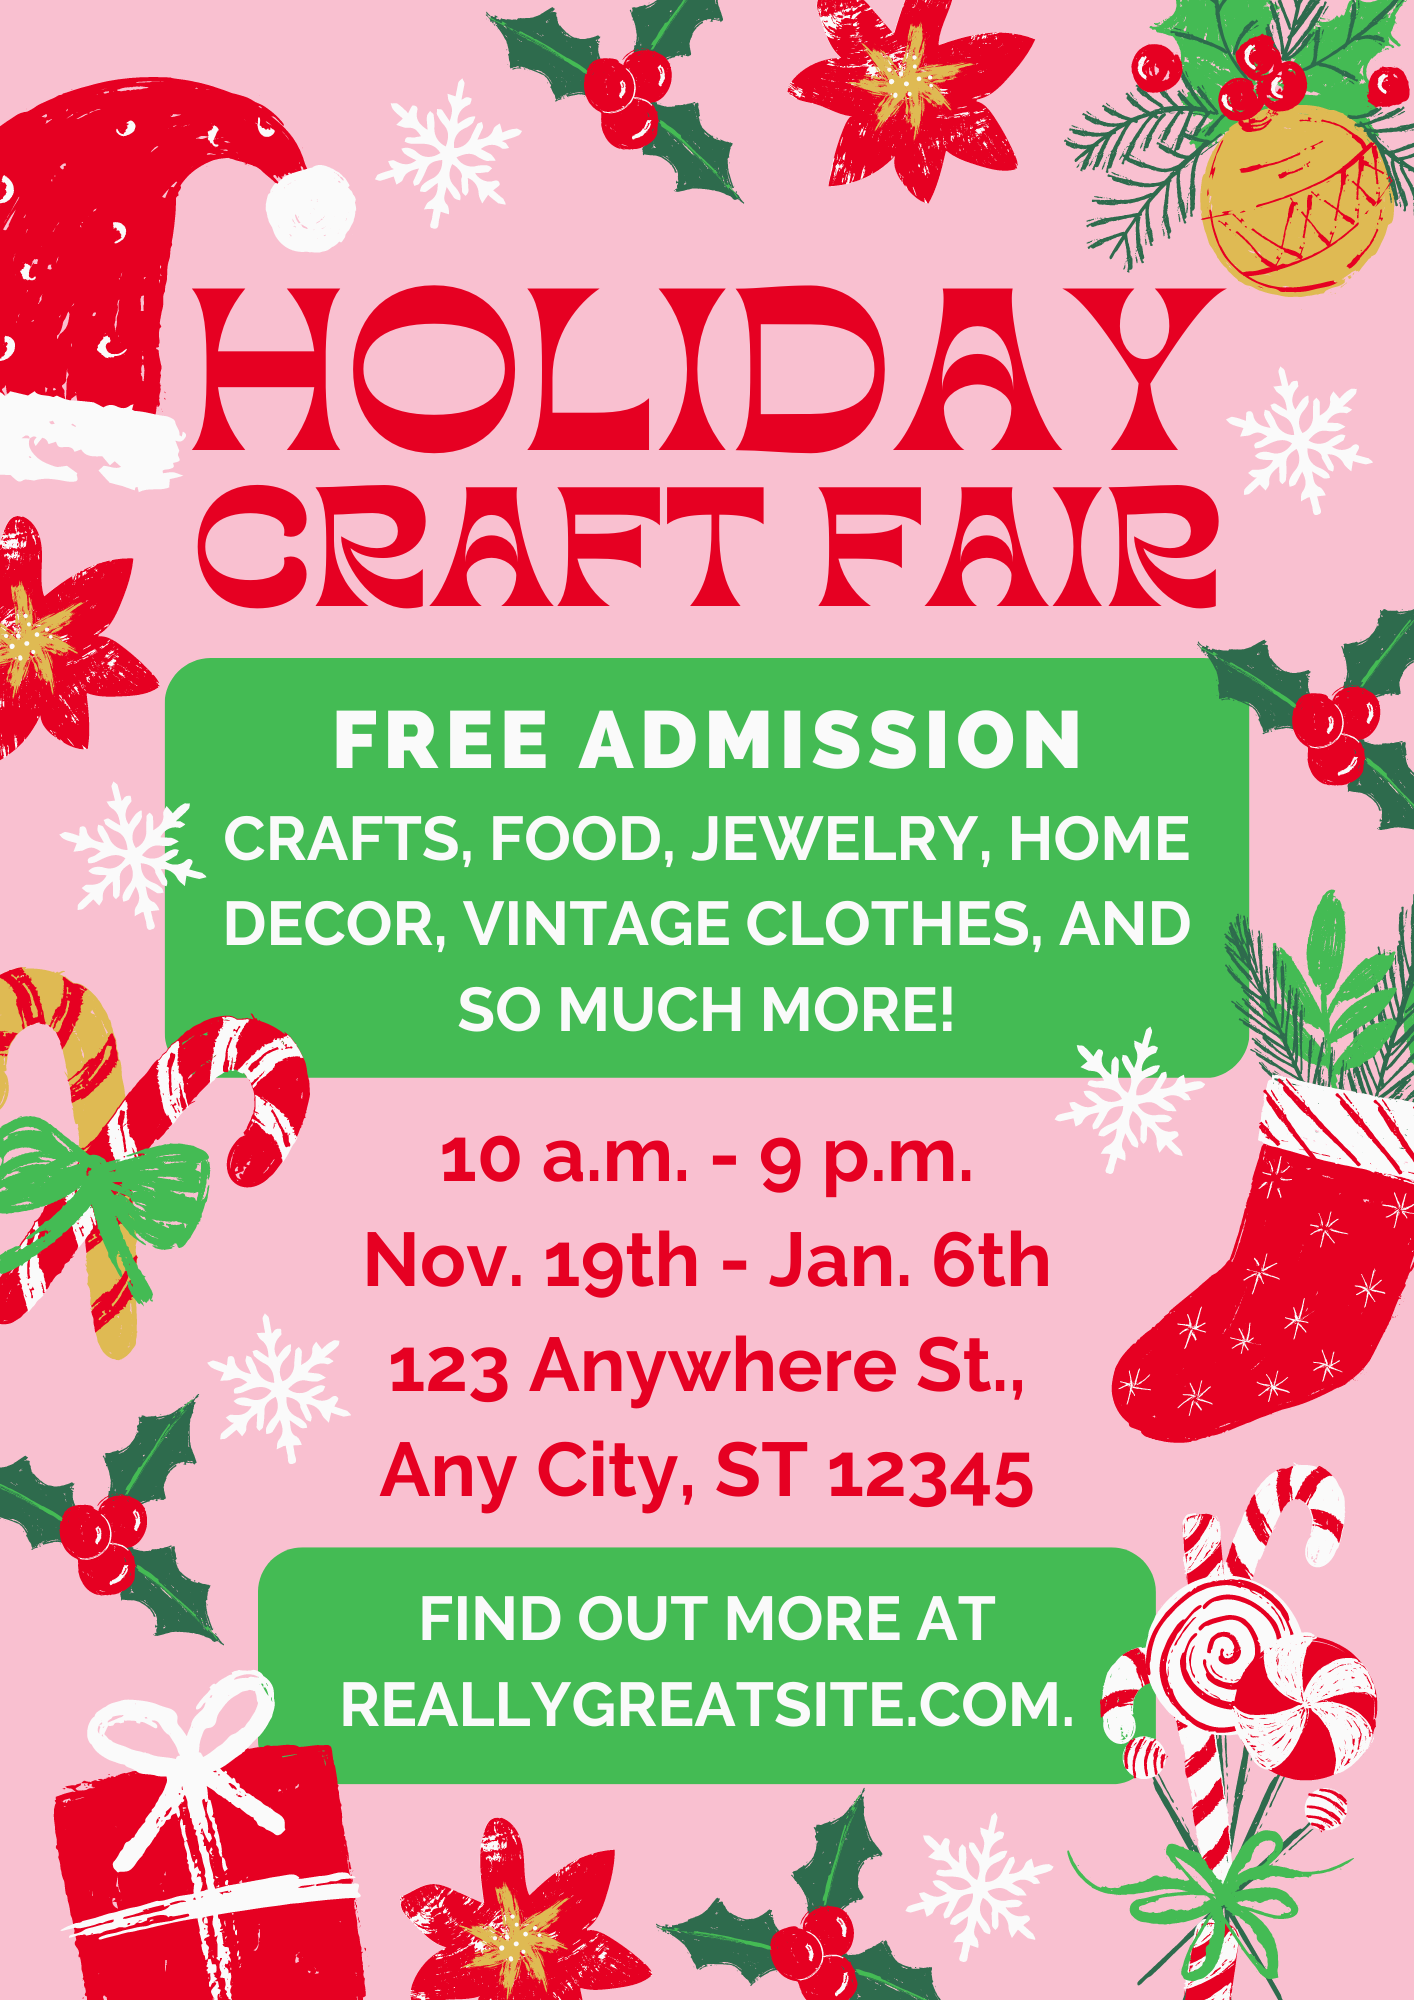 Flyer 6 - Red Pink Green Colorful Vibrant Holiday Craft Fair Flyer.png